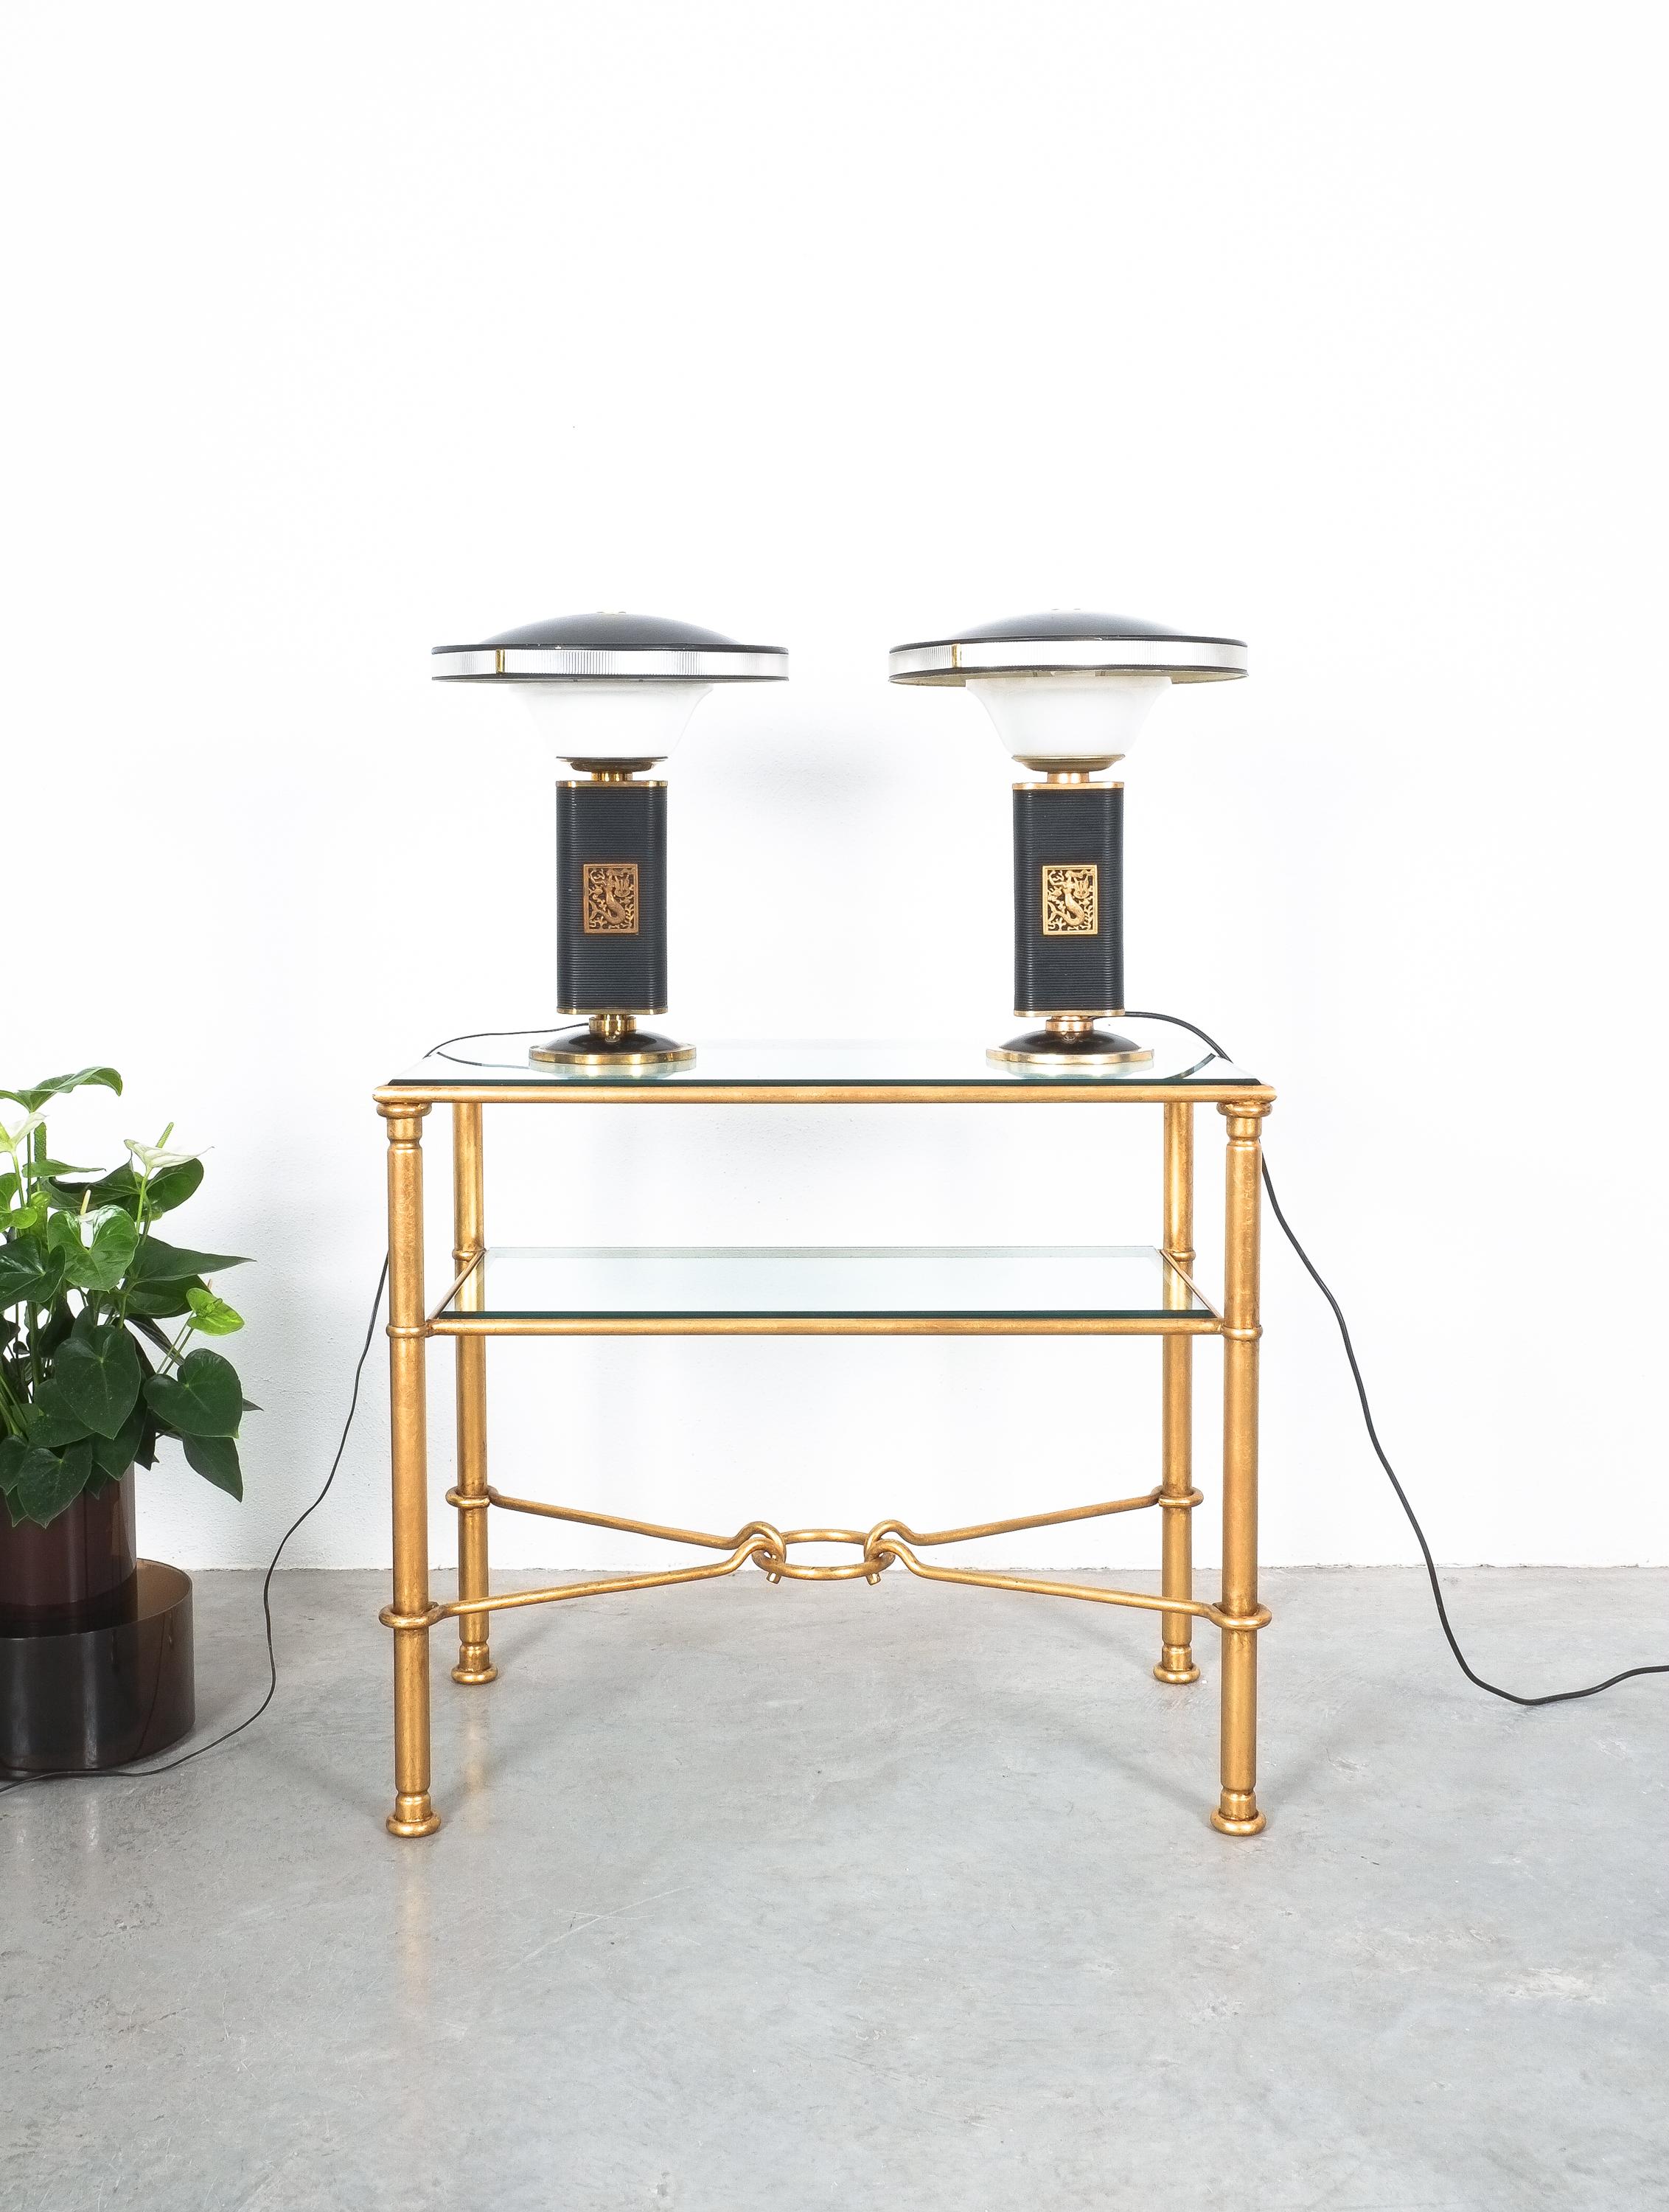 Pair of mermaid table lights by Eileen Gray for Jumo, circa 1945 

Exceptional pair of French table lamps 'Sirene' by Eileen Gray edited by Jumo. This iconic lamp is constructed in black lacquered folded sheet metal resting on a circular brass and